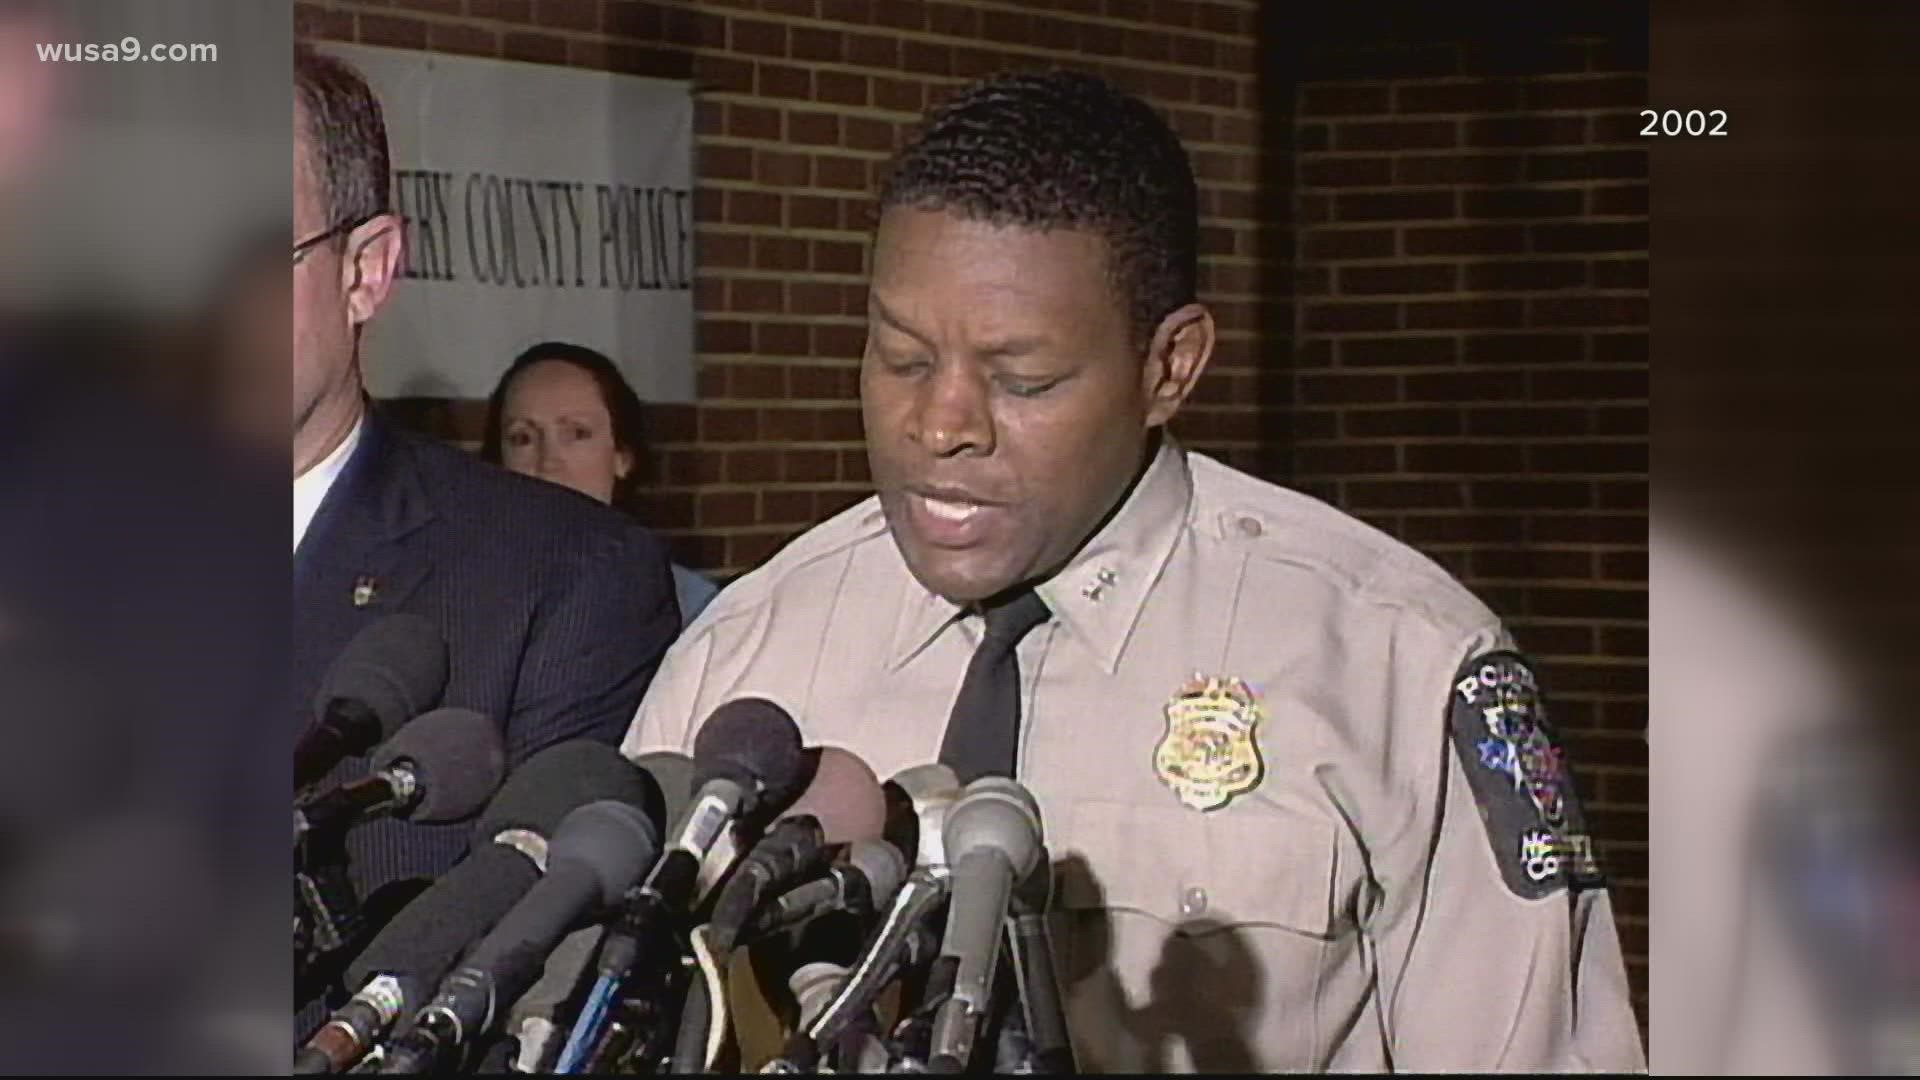 Moose served as the Montgomery County Police Chief from 1999 to 2003.